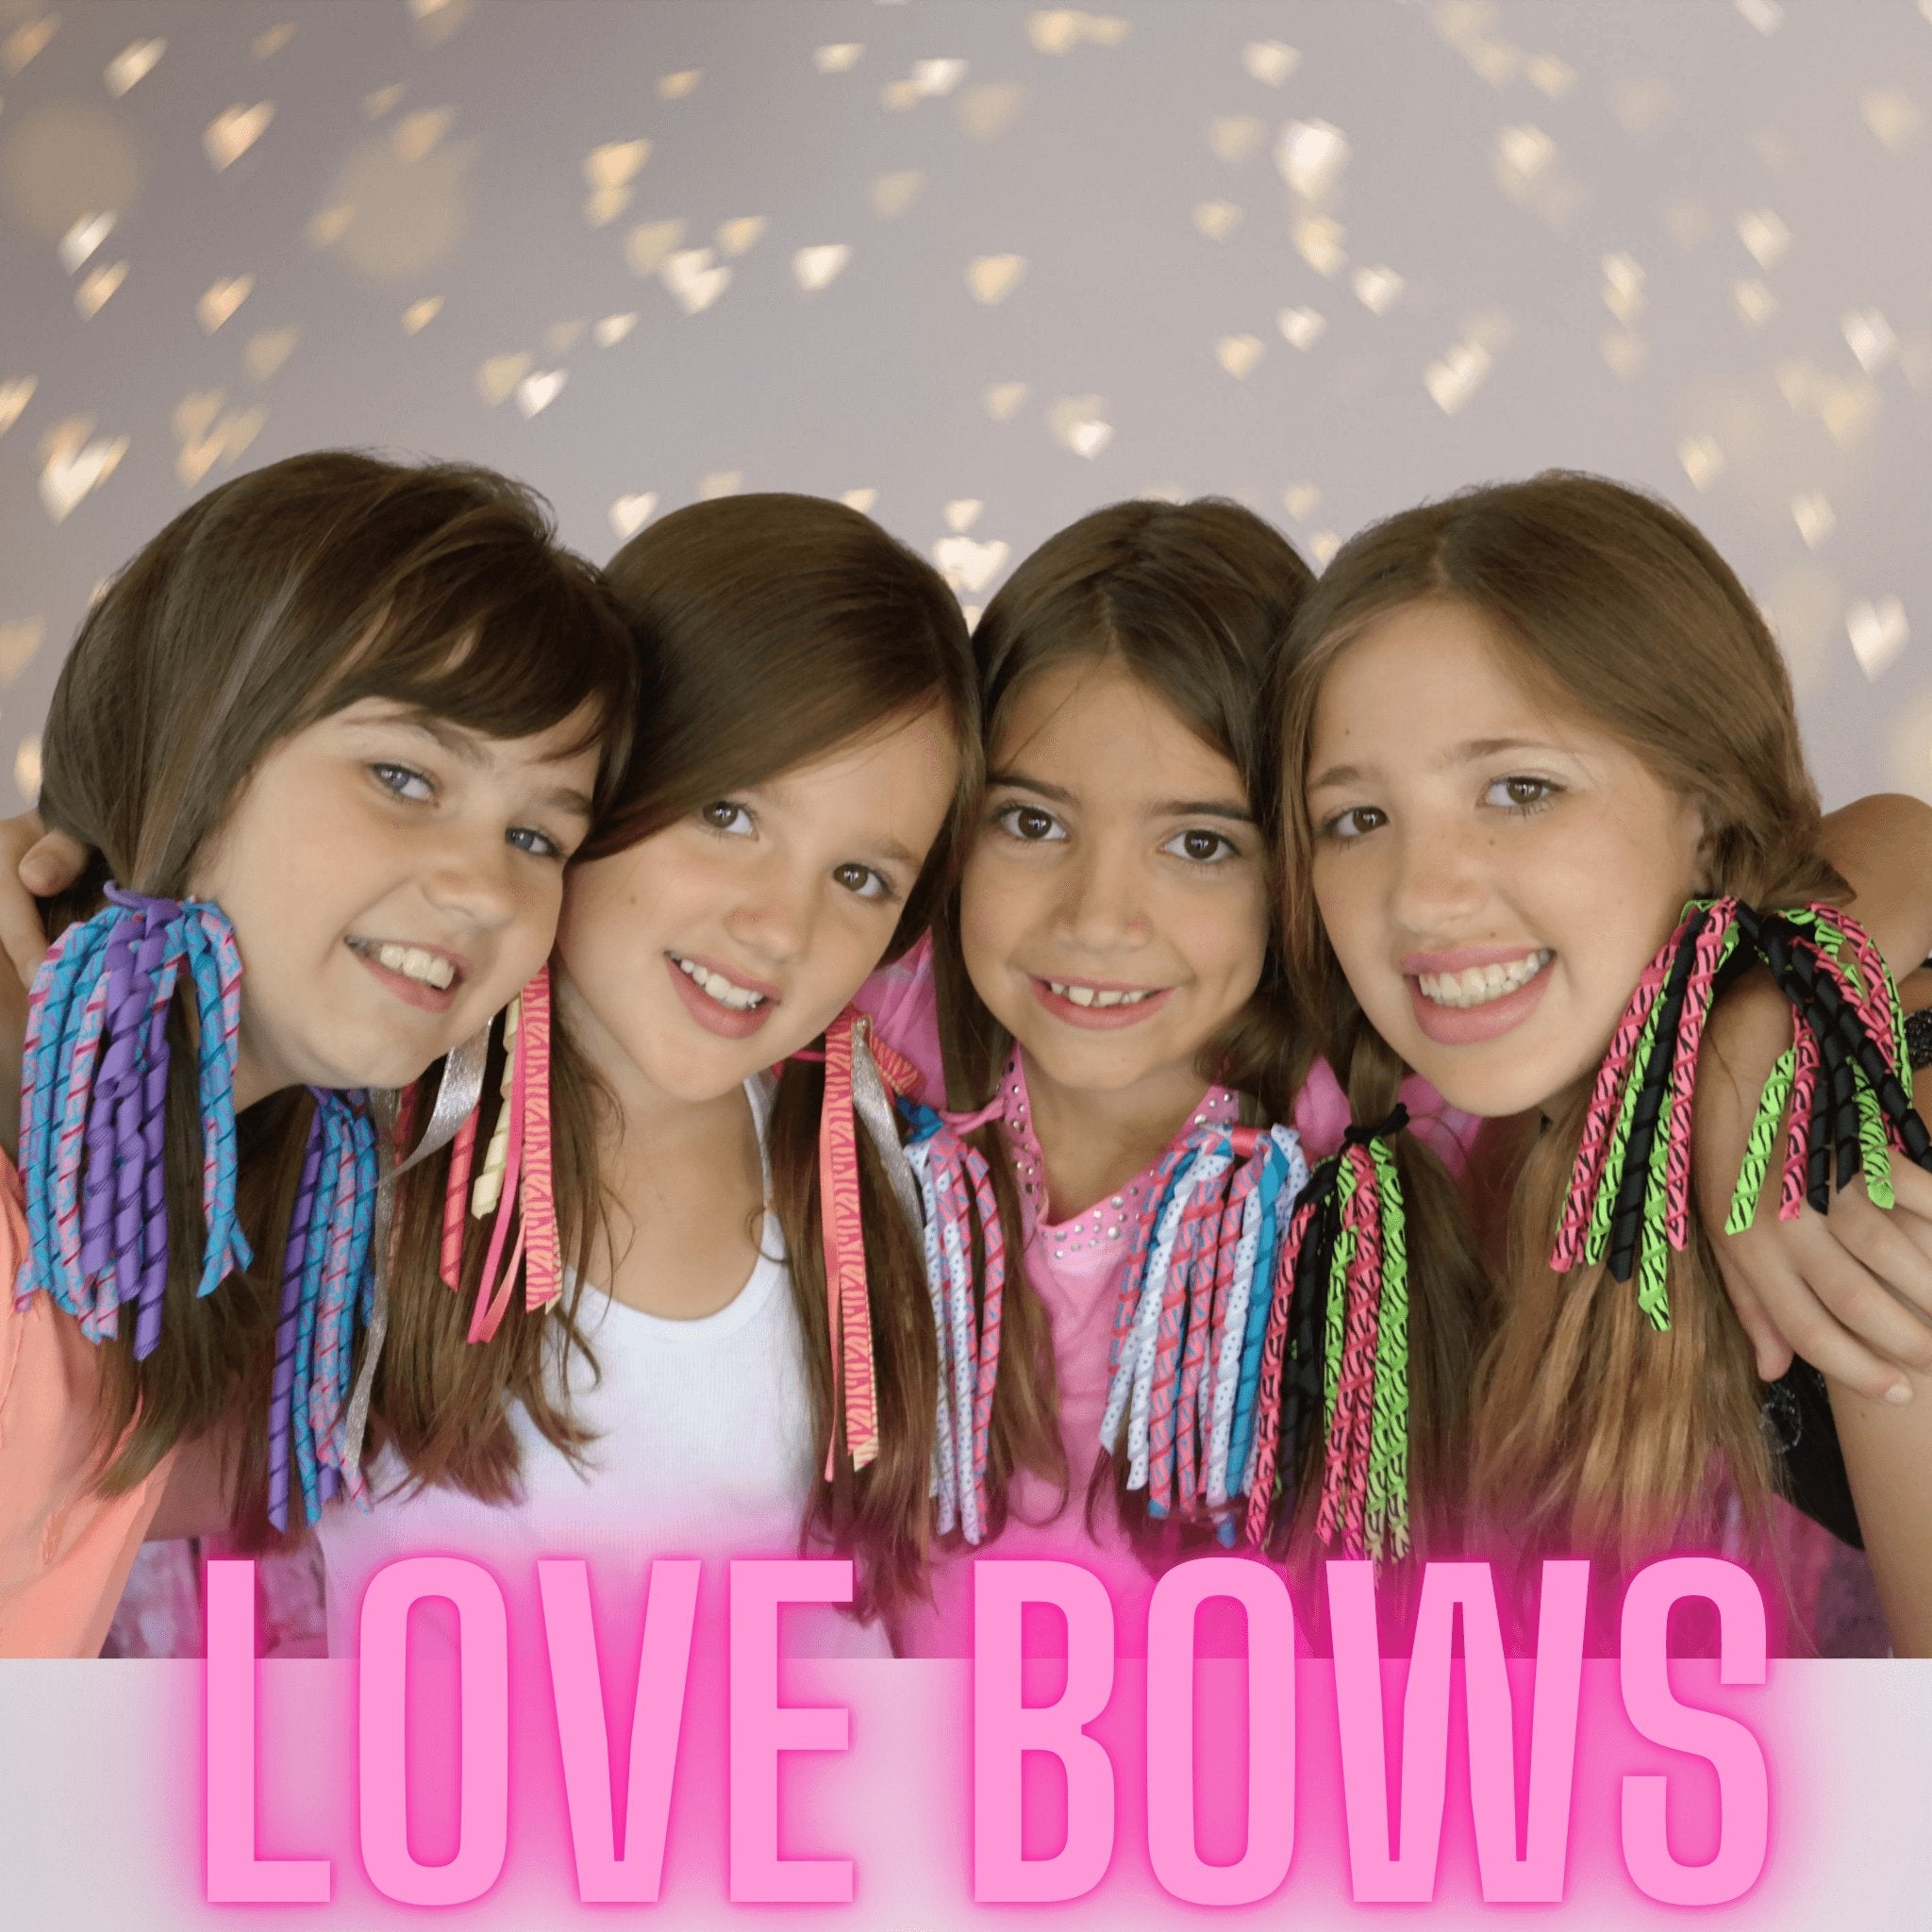 Calling all girls who love Hair Bows - Chicky Chicky Bling Bling, LLC